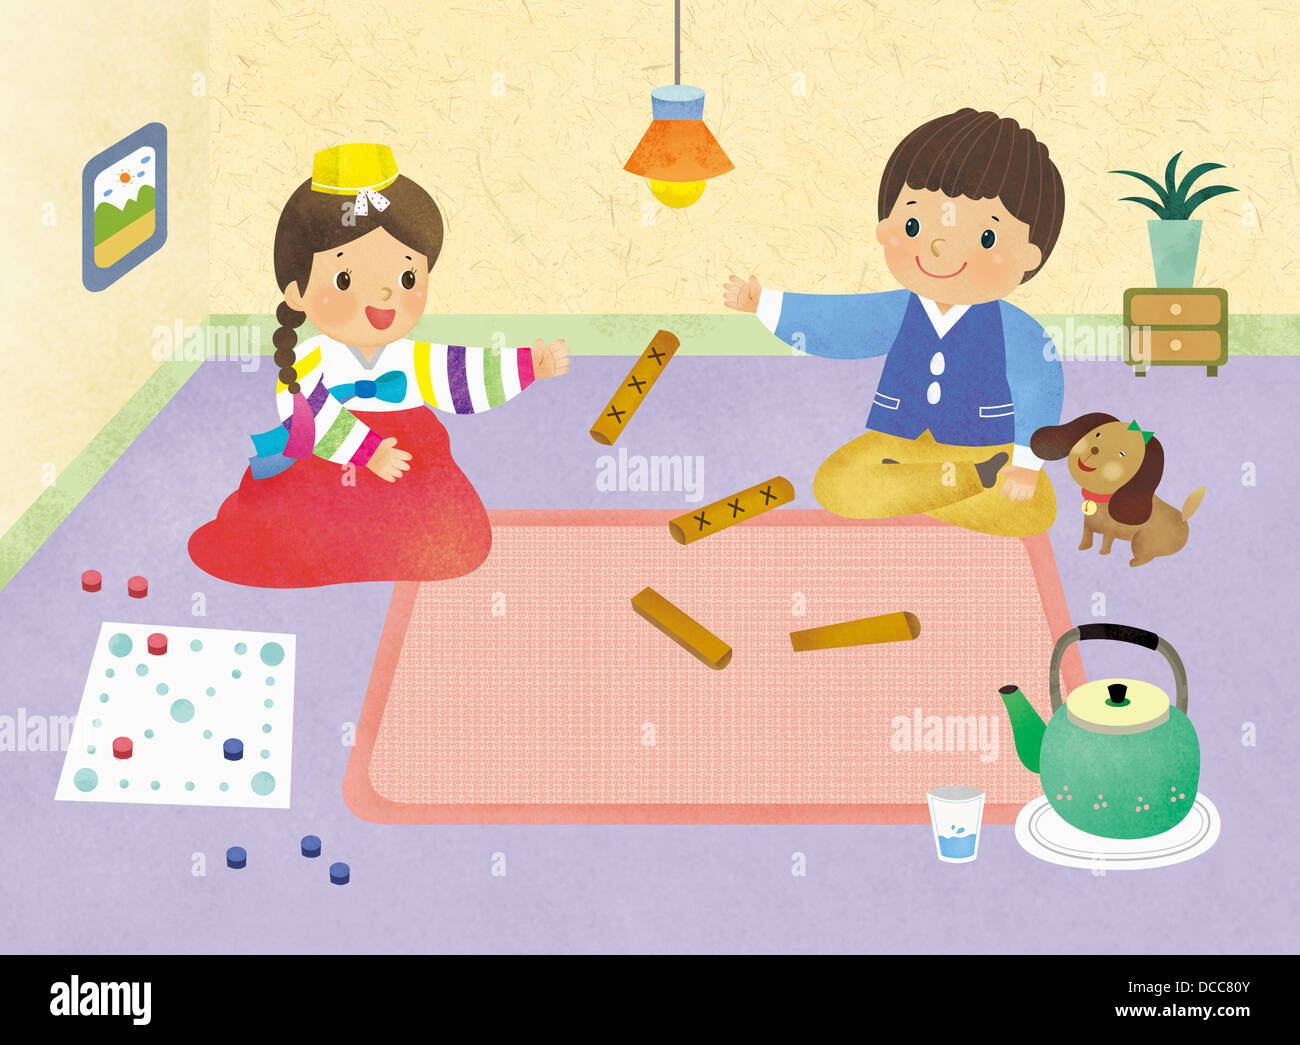 illustration of a couple wearing Korean traditional costume playing Korean game Stock Photo